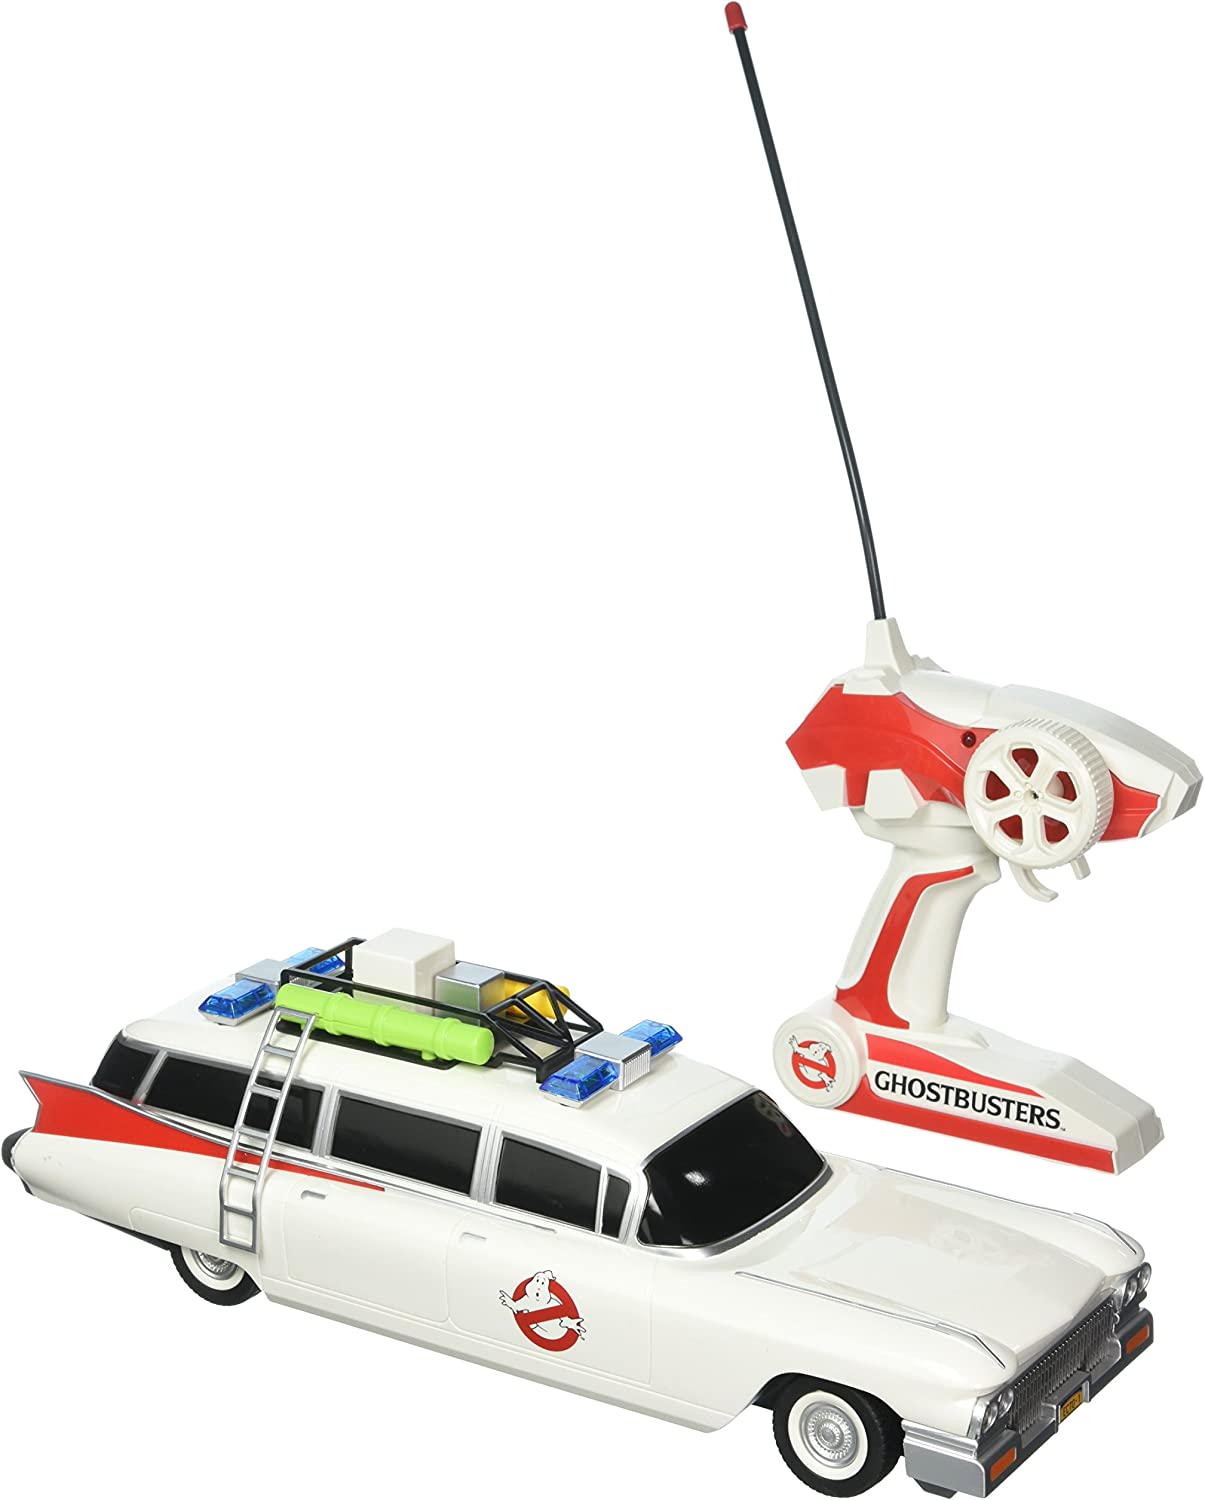 Detail Ghostbusters Auto Modell Nomer 12